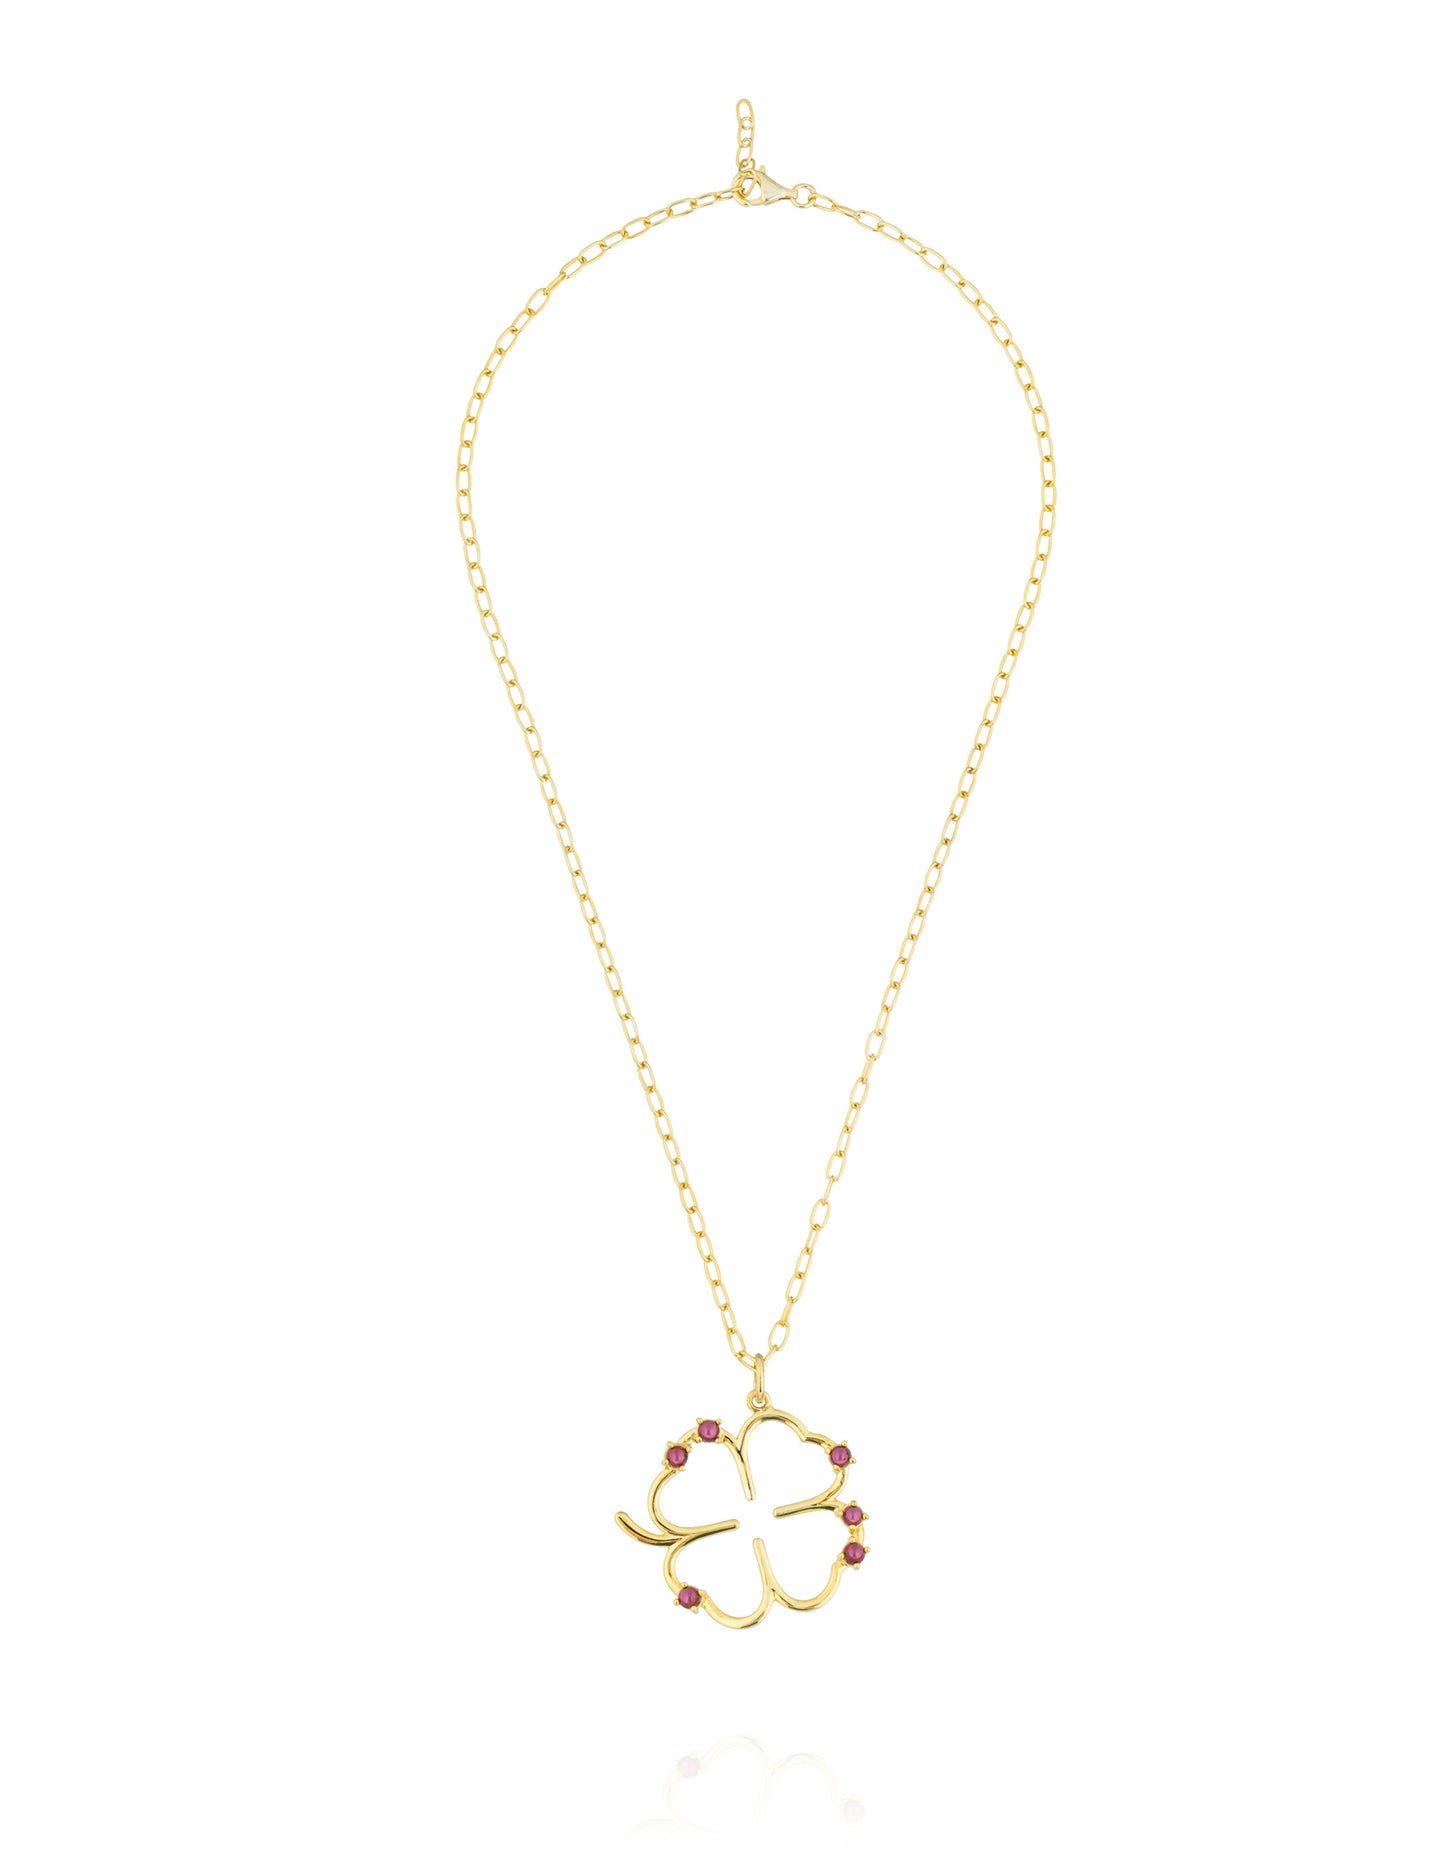 925 Silver 18KT Yellow Gold Plated Long Chain Large Clover with Rhodolite Cabouchon